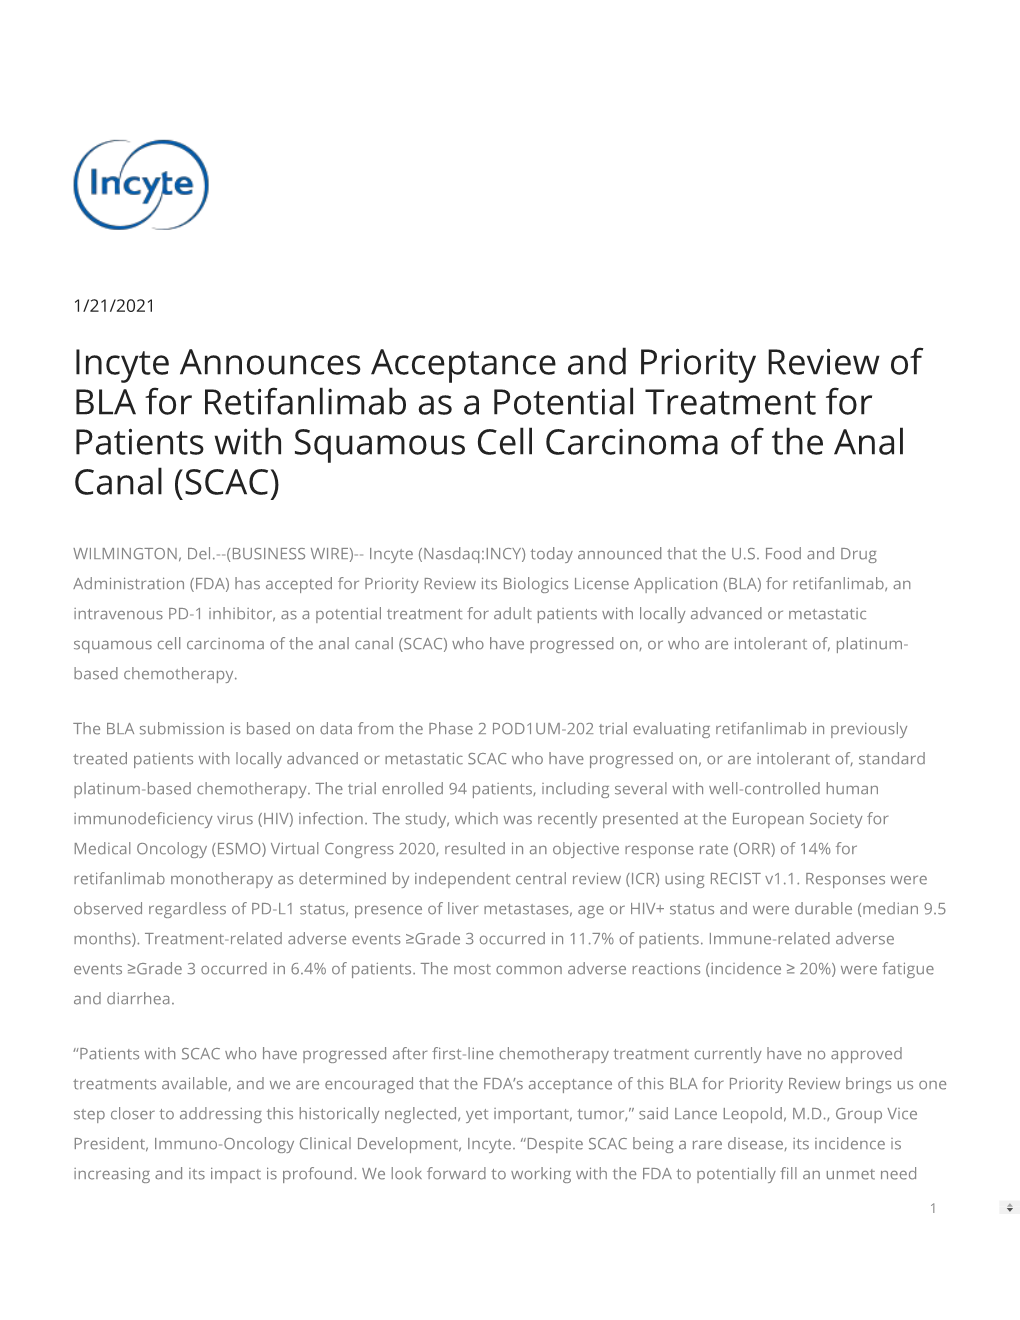 Incyte Announces Acceptance and Priority Review of BLA for Retifanlimab As a Potential Treatment for Patients with Squamous Cell Carcinoma of the Anal Canal (SCAC)